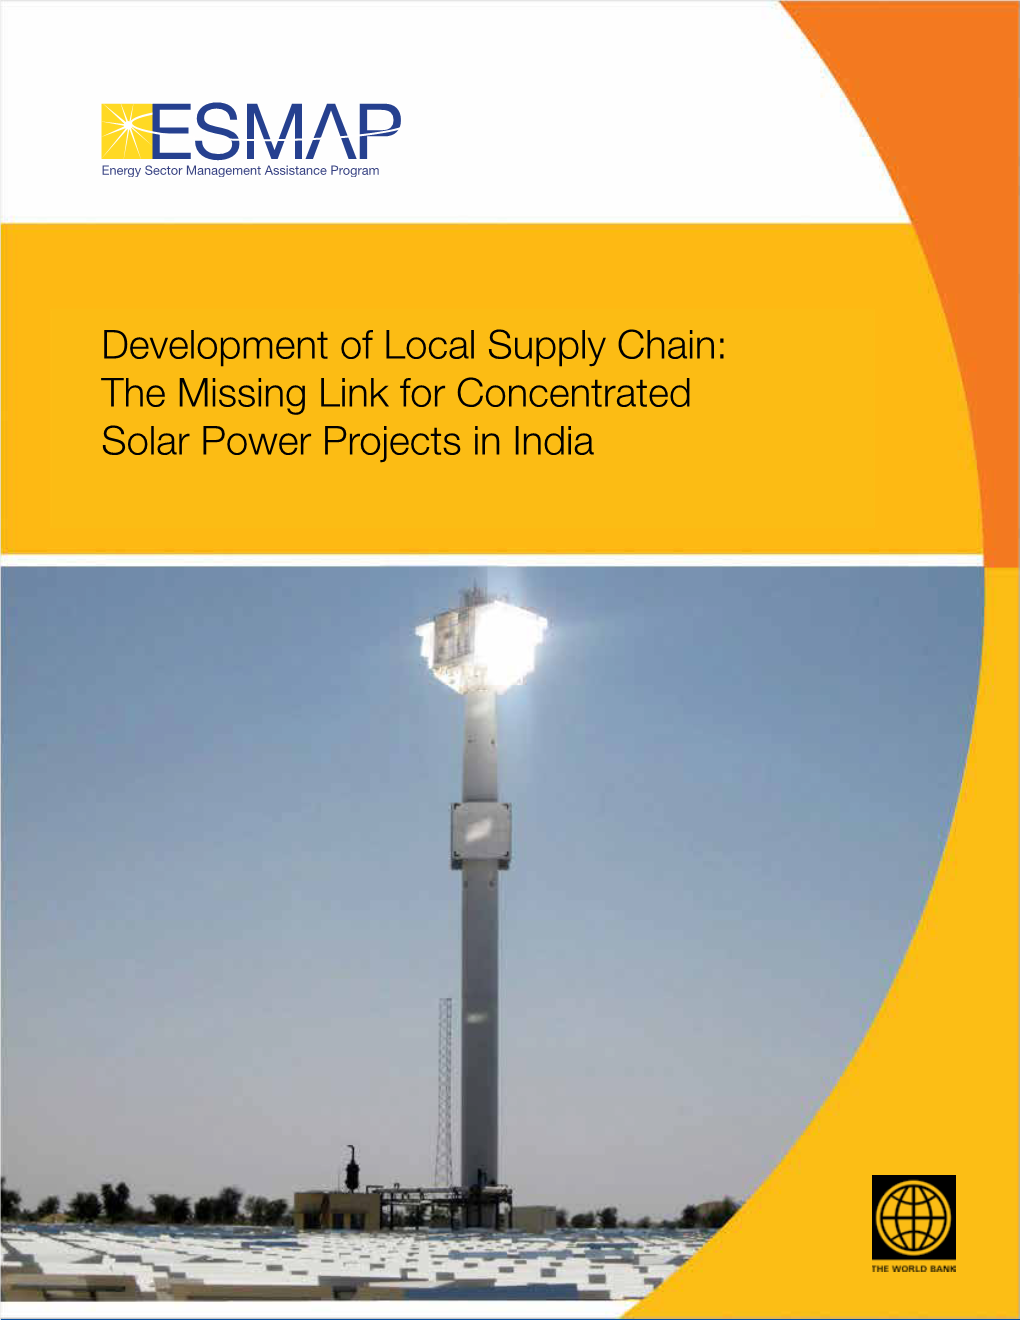 The Missing Link for Concentrated Solar Power Projects in India ESMAP MISSION